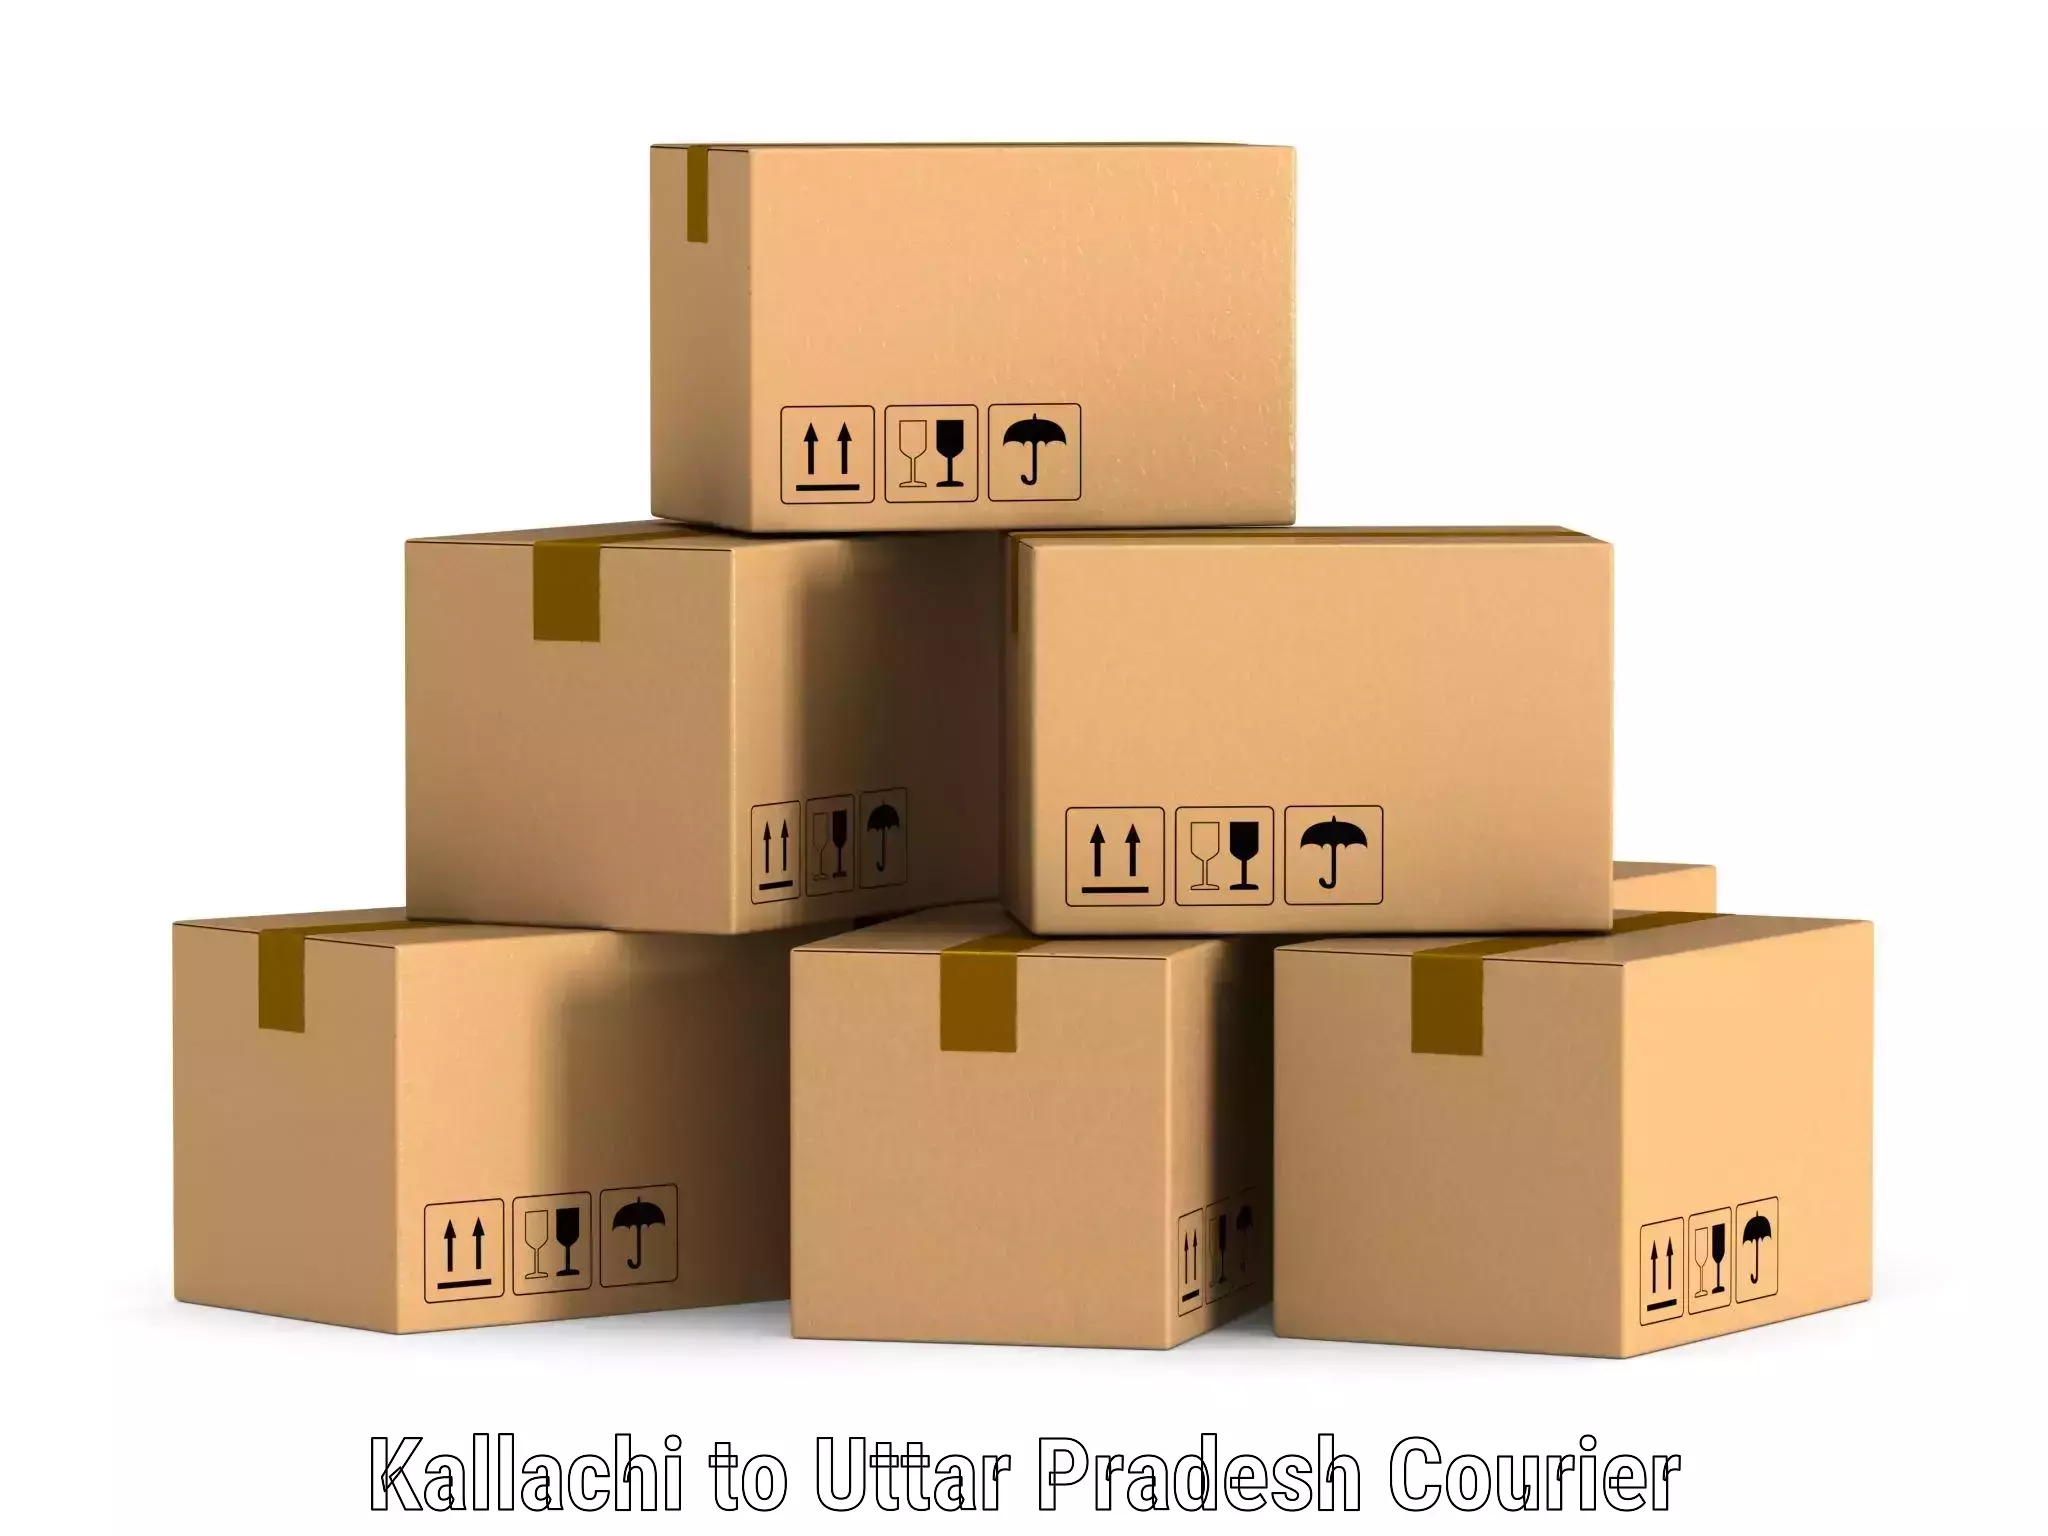 Corporate courier solutions in Kallachi to Ghazipur